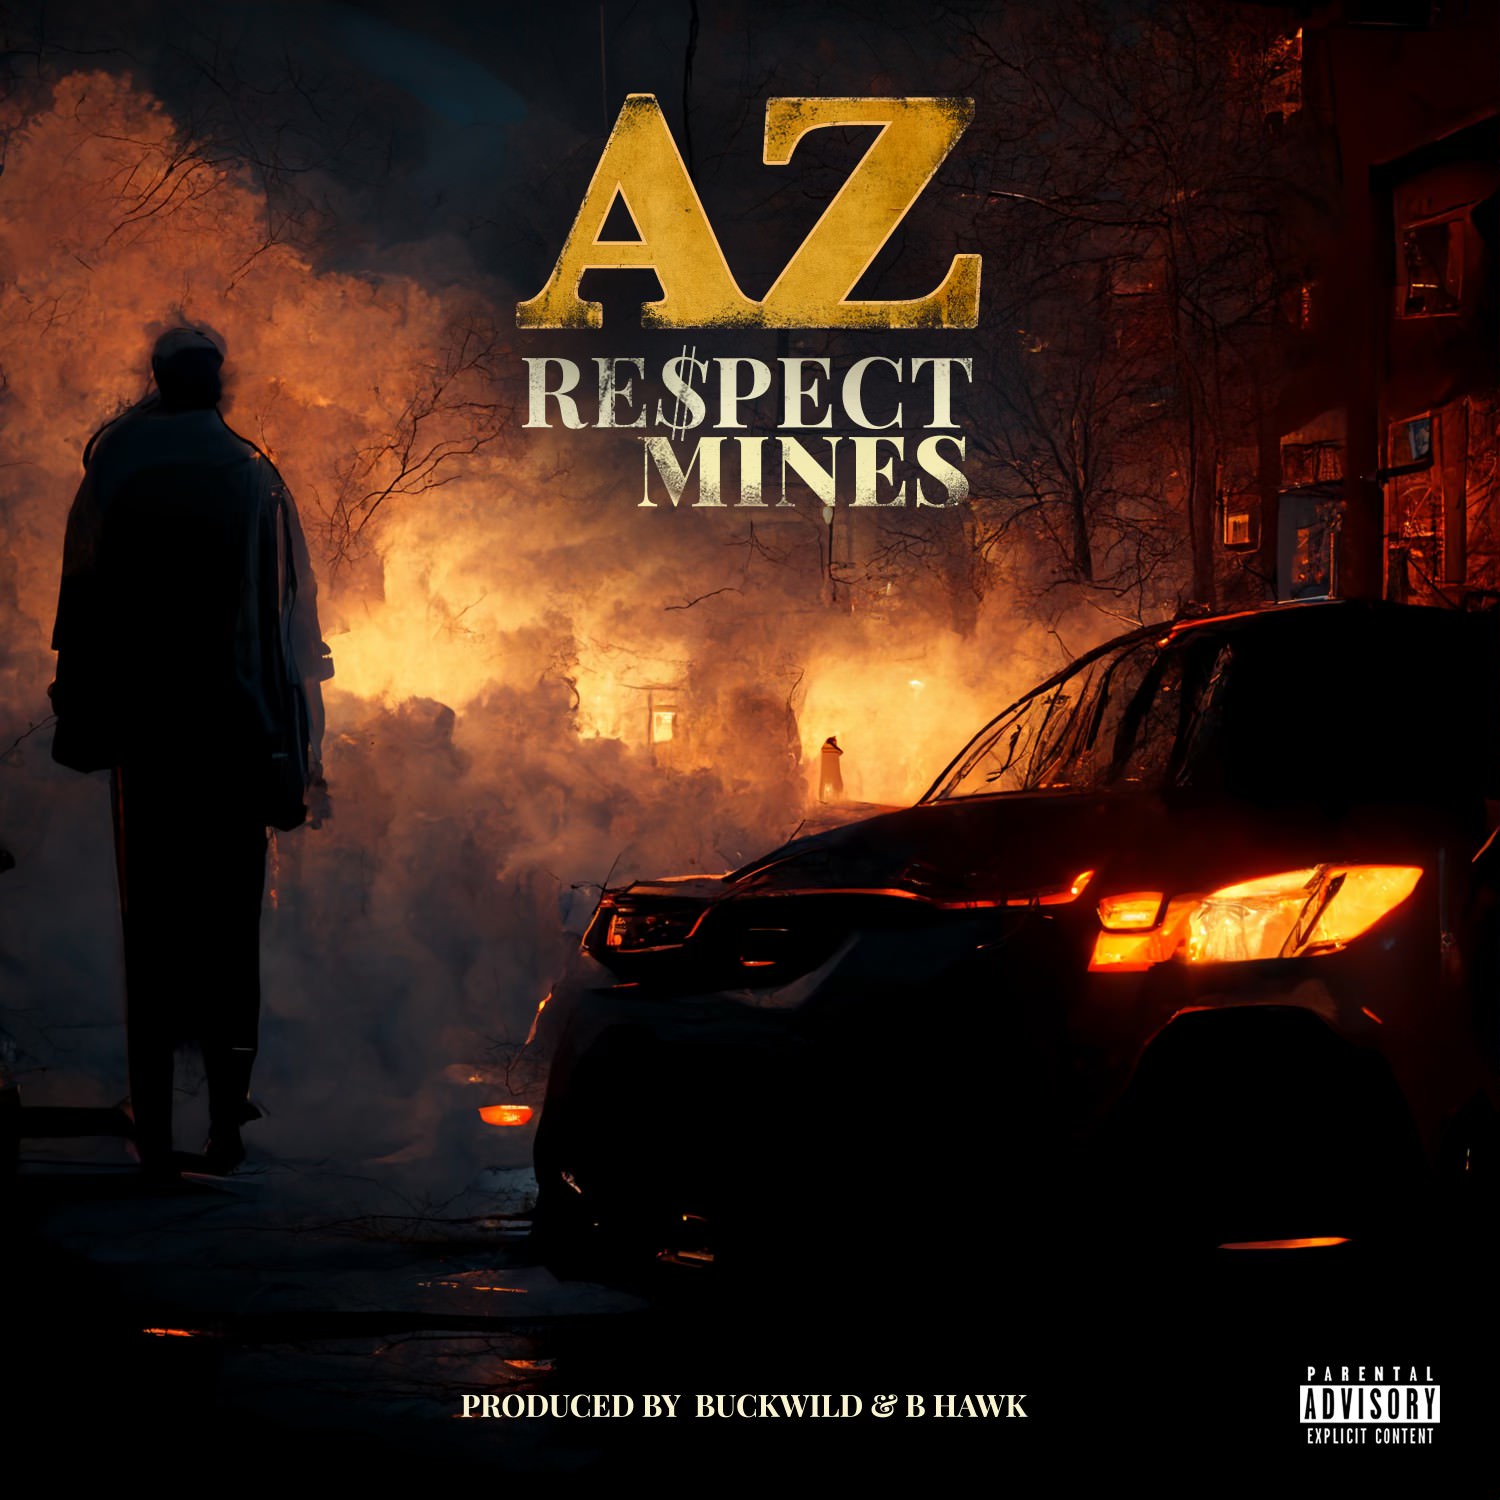 AZ Reminds You To “Respect Mines” On His New Single